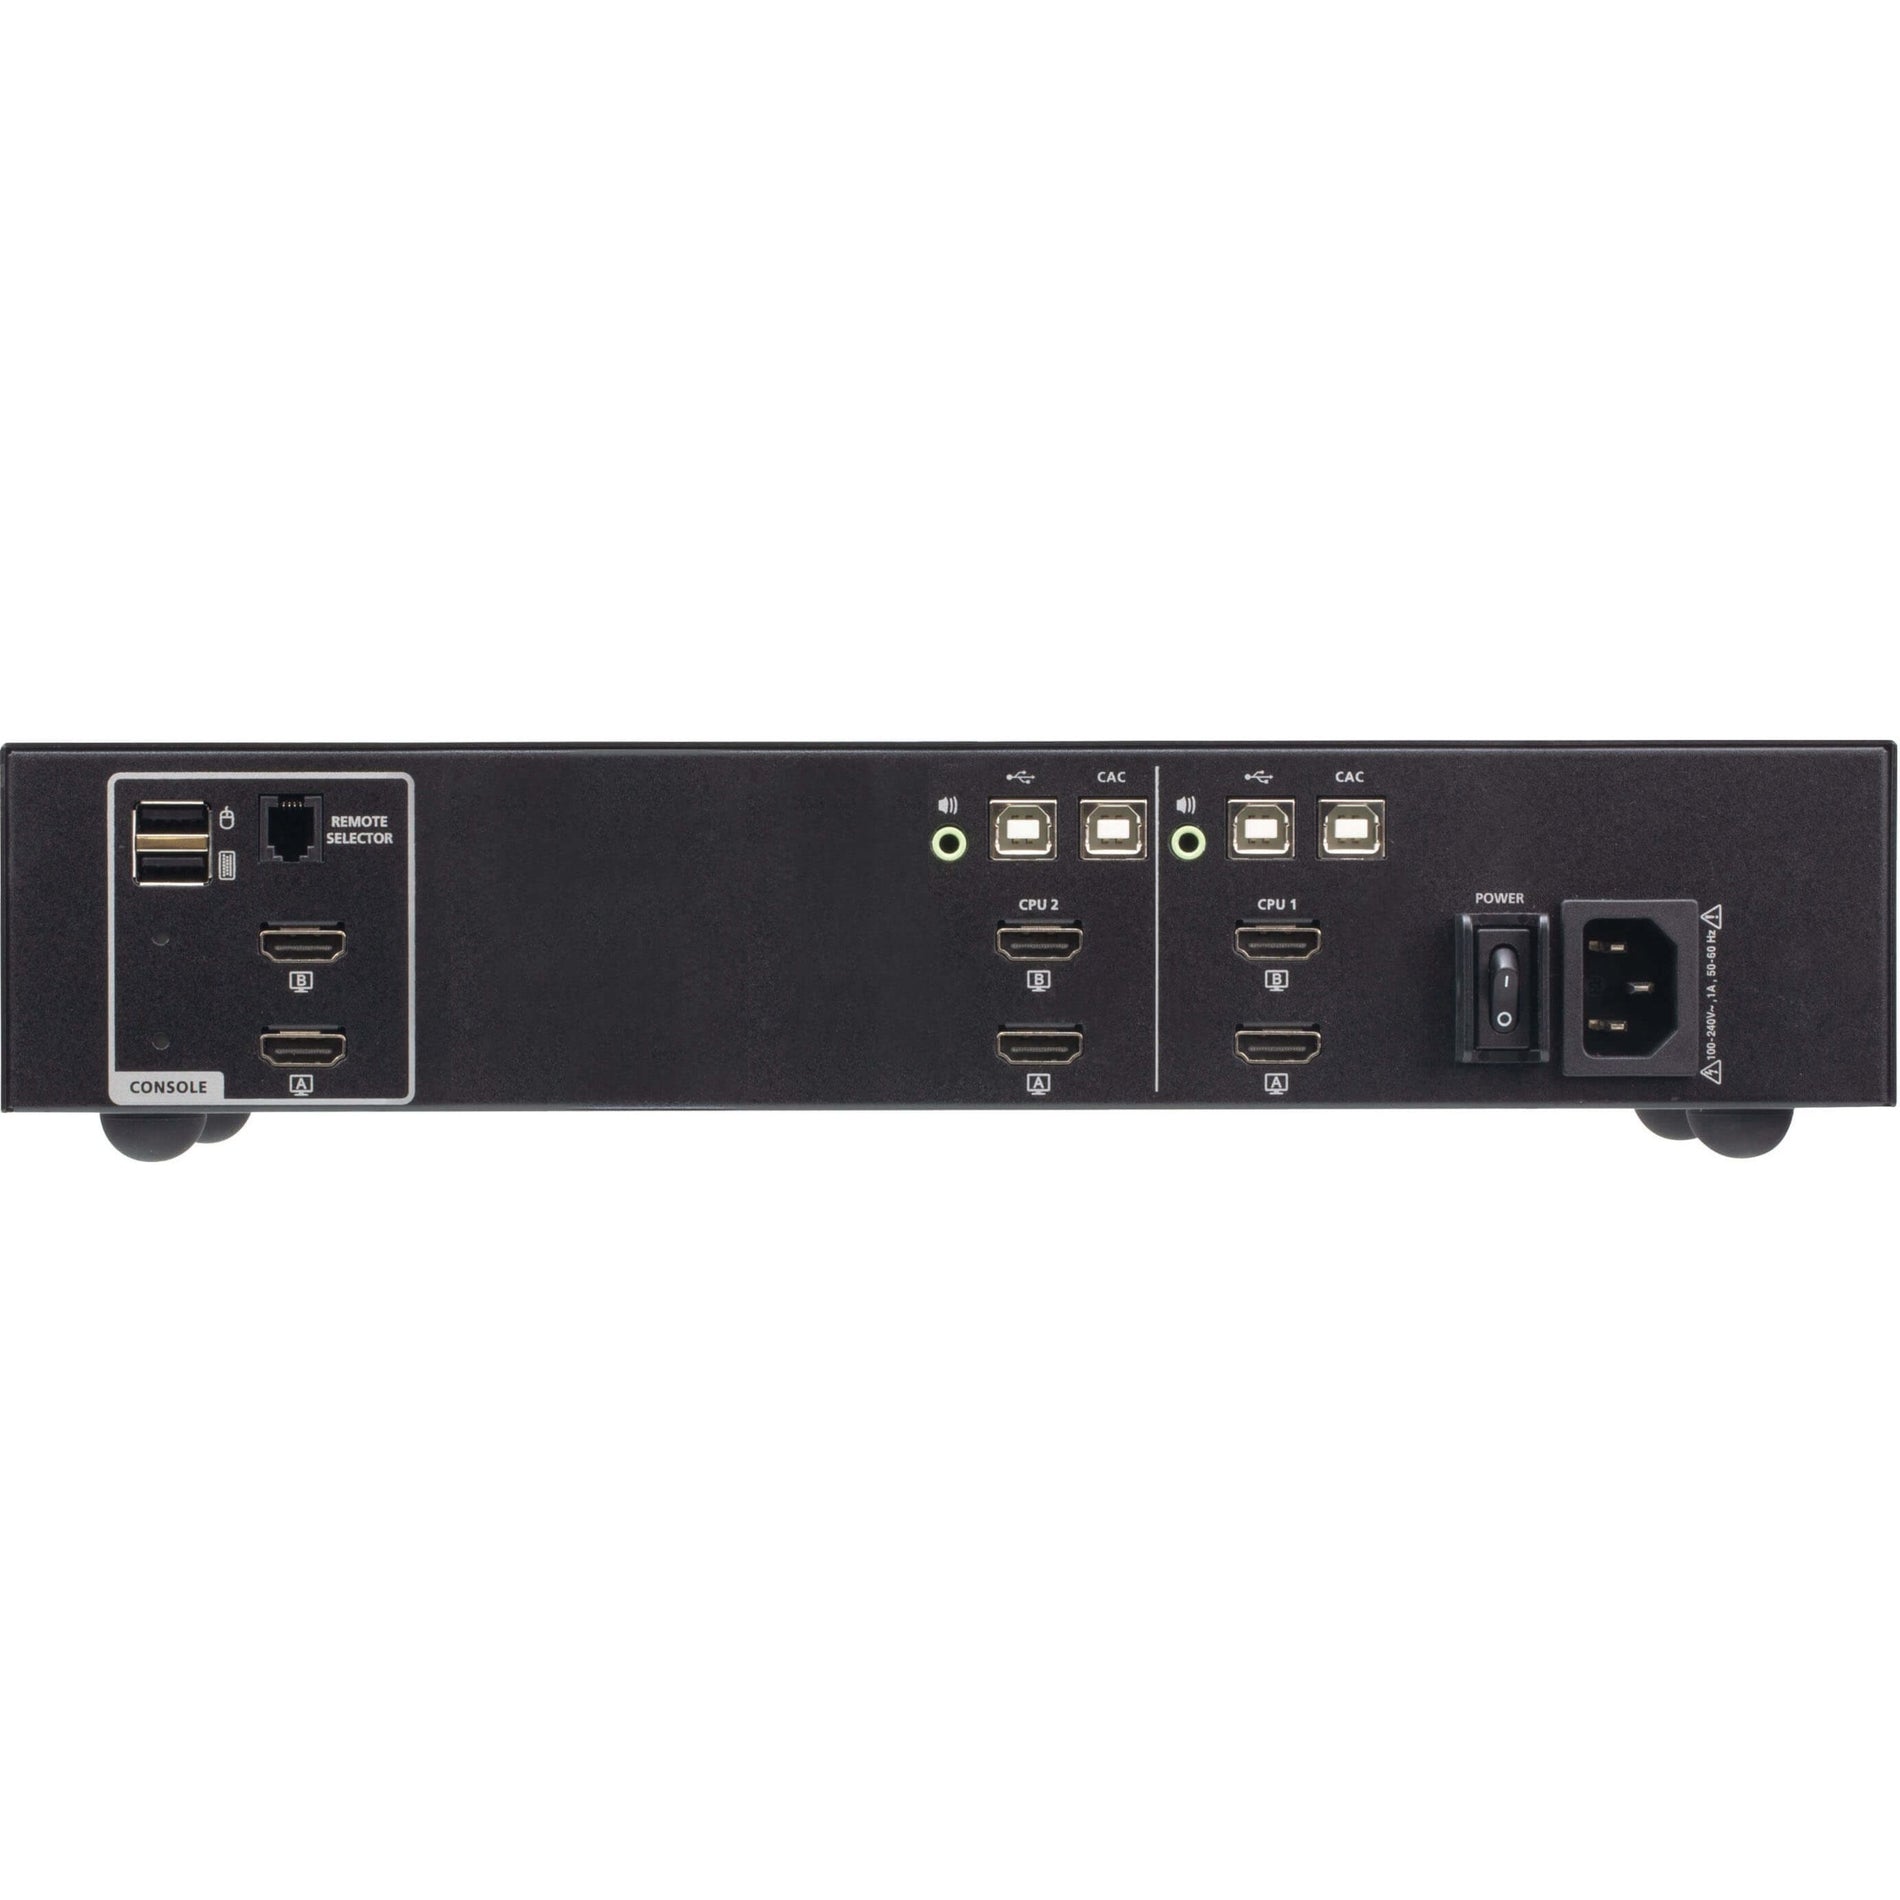 ATEN CS1142H4C 2-Port USB HDMI Dual Display Secure KVM Switch with CAC (PSD PP v4.0 Compliant), 3840 x 2160 Resolution, 3 Year Warranty